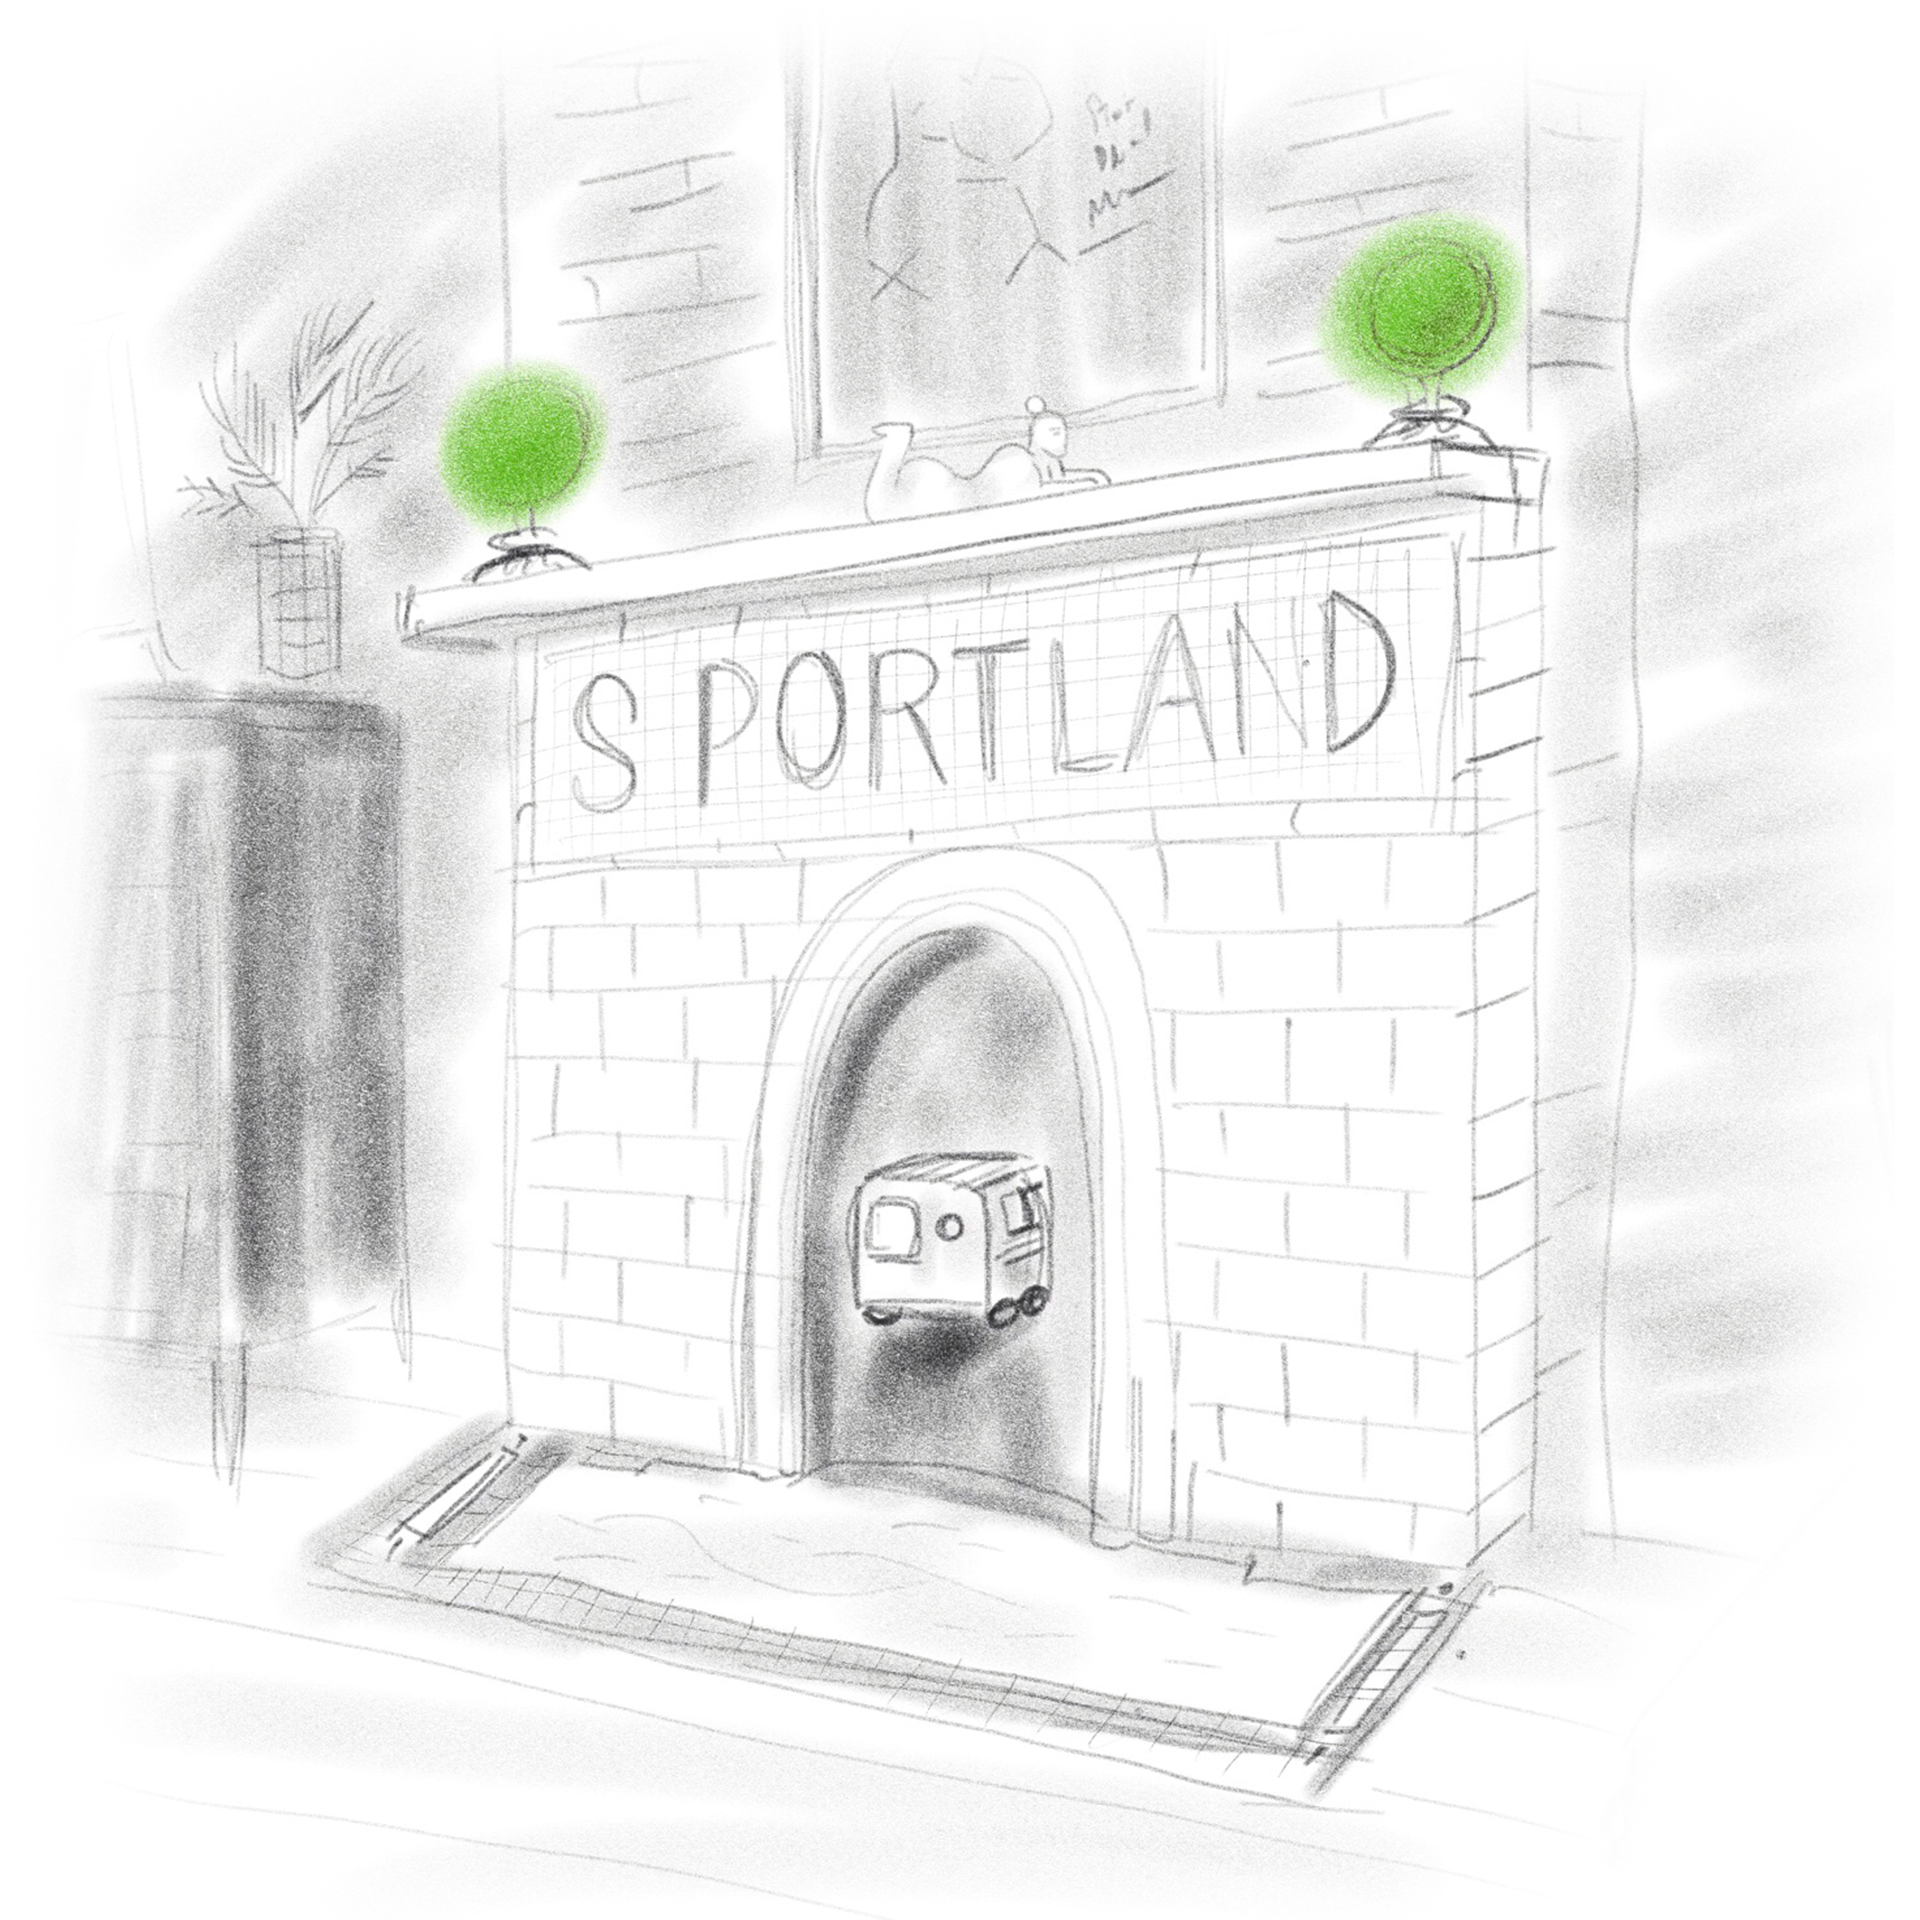 Gallery_SPortland_Square-c.png